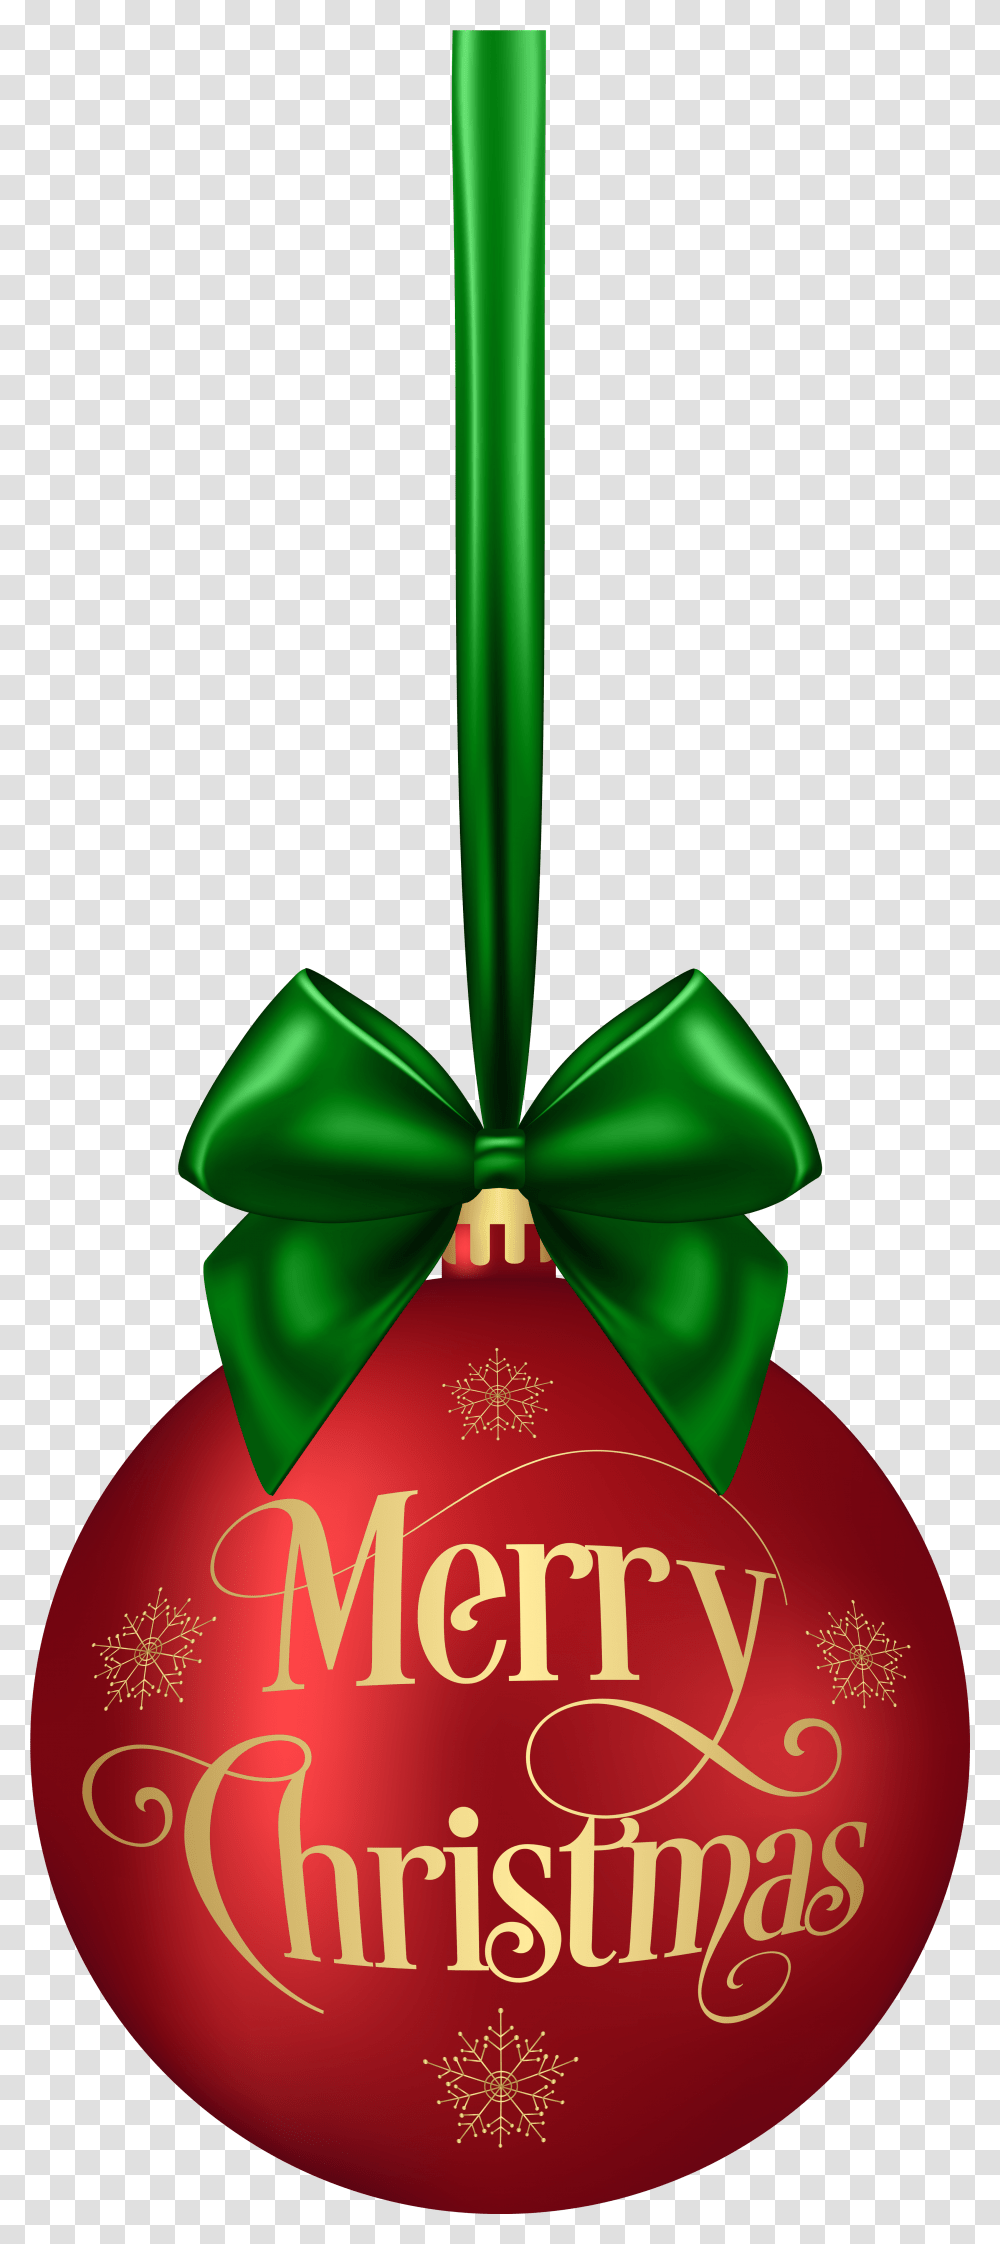 Merry Christmas Ball Red Clip Art Deco Image Merry Christmas Ball, Ornament, Bottle Transparent Png